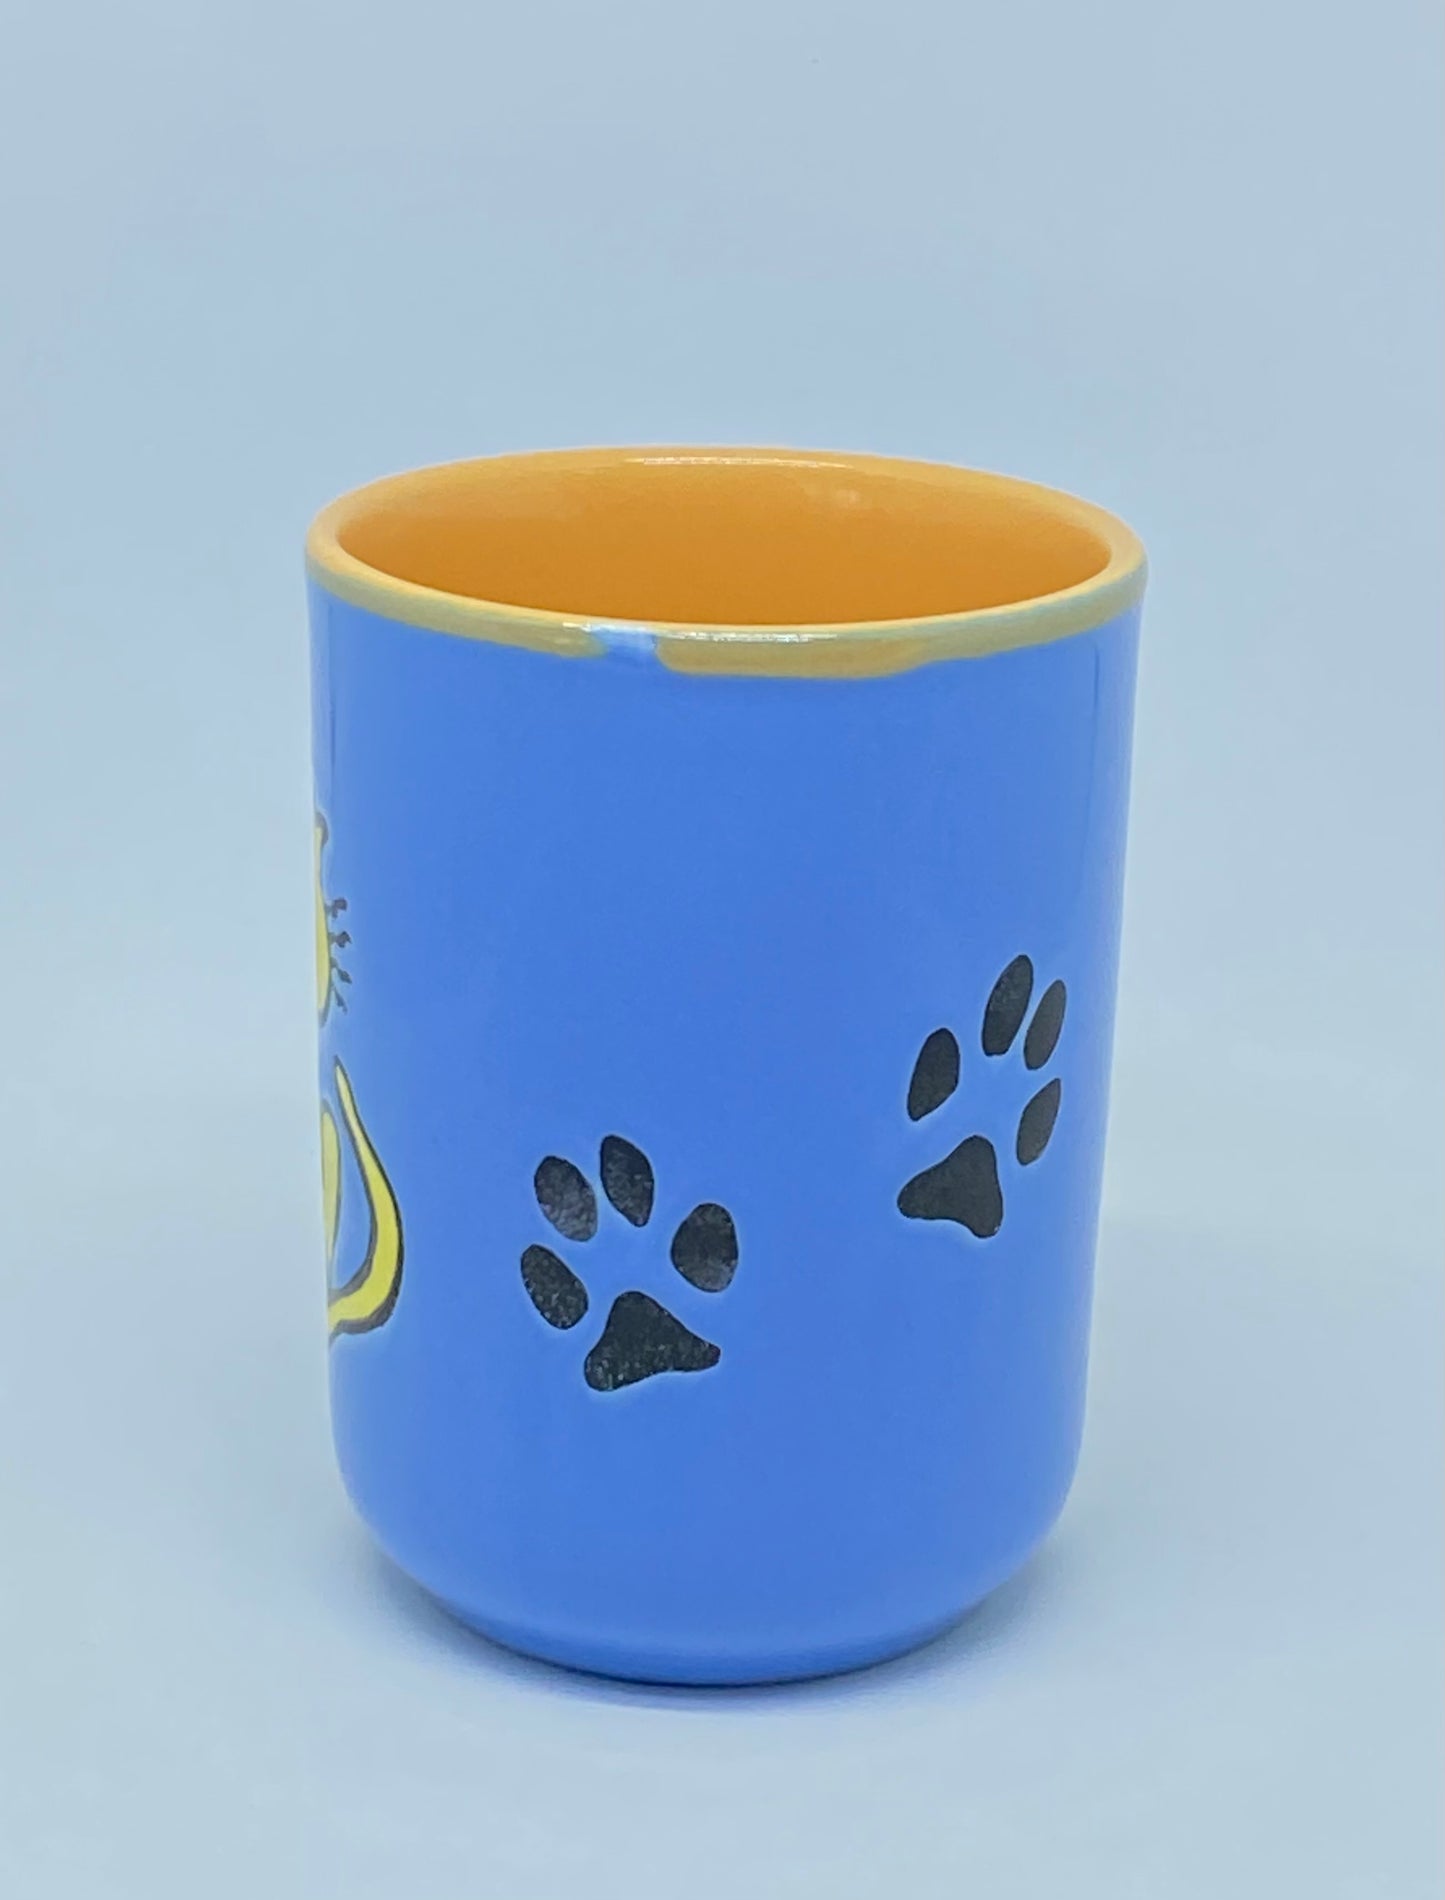 Retro 1980s Staffordshire Cat Cup - light blue and yellow